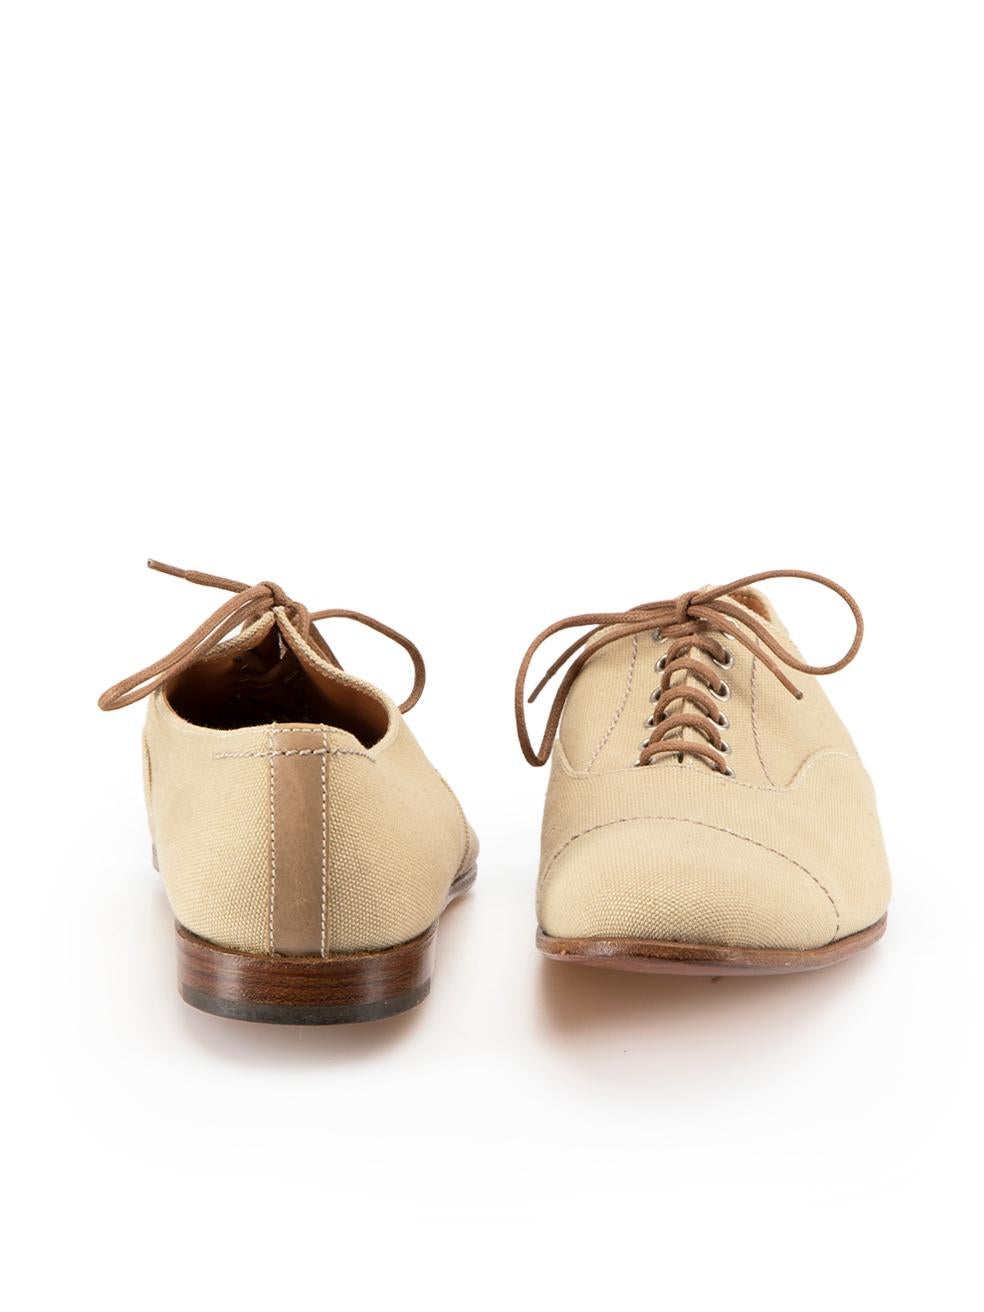 Beige Canvas Round Toe Oxfords Size IT 37 In Good Condition For Sale In London, GB